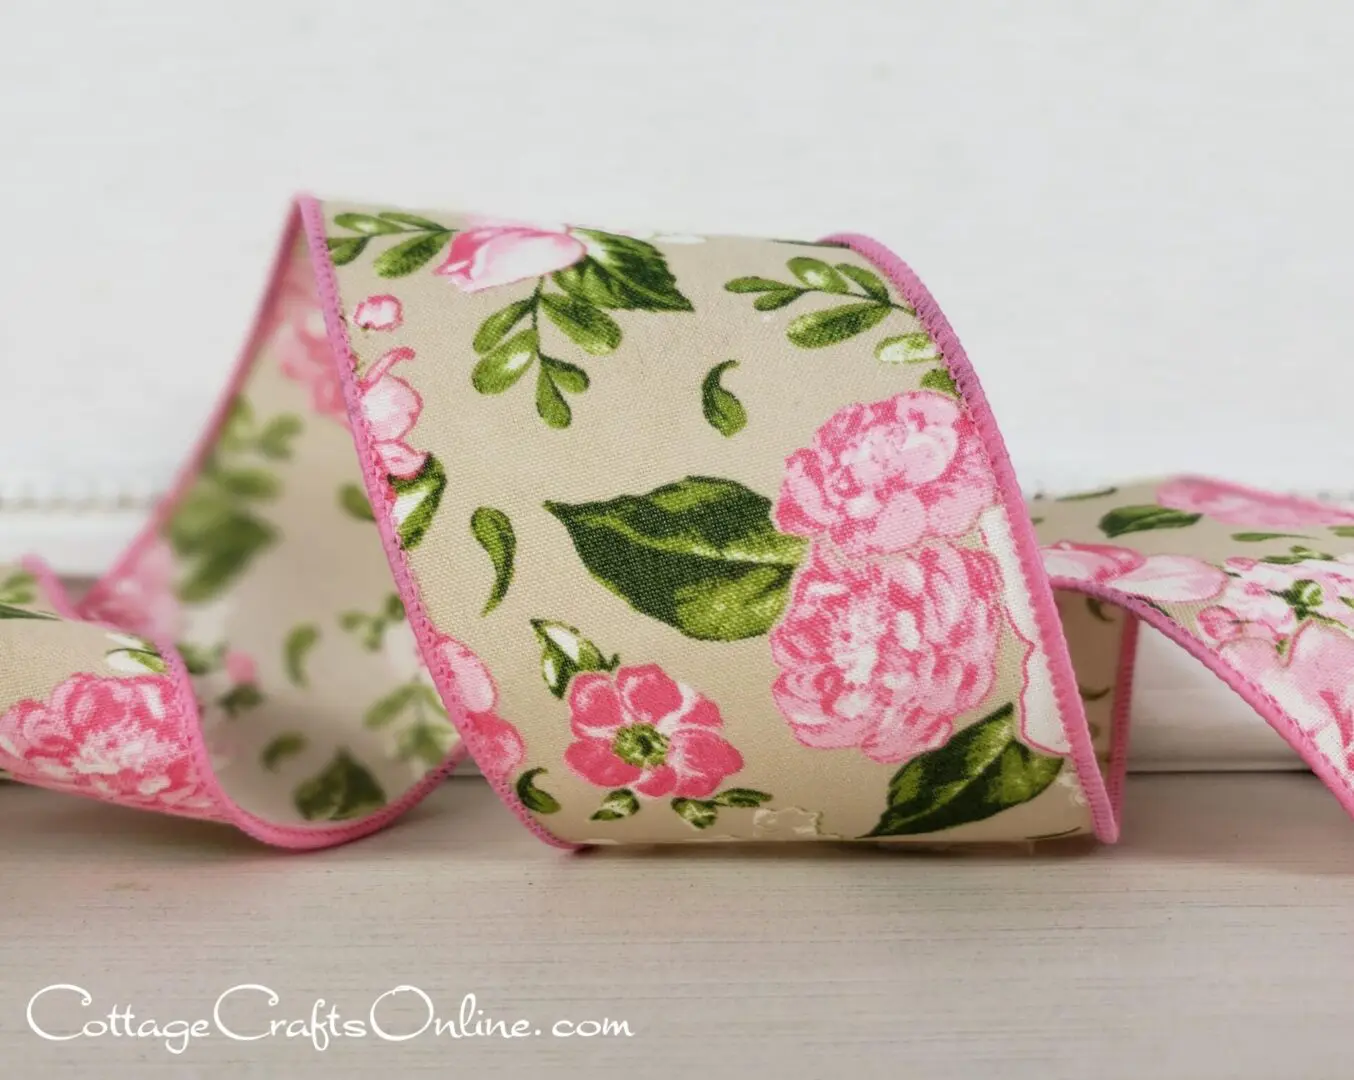 a pink and green floral ribbon on a wooden surface.